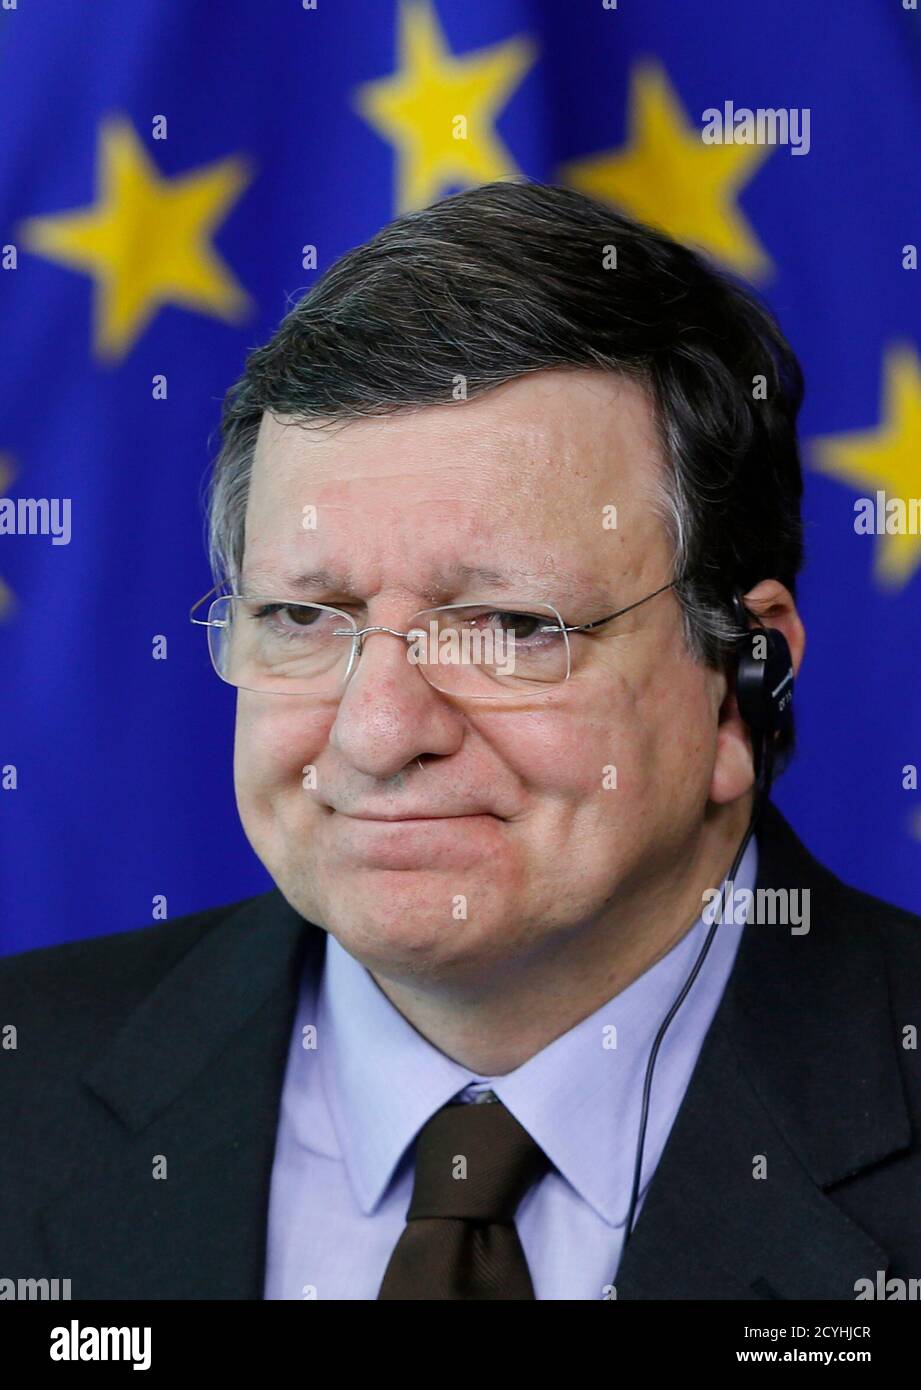 European Commision President Jose Manuel Barroso reacts during a joint news conference with Serbian Prime Minister Ivica Dacic (unseen) at the EU Commission headquarters in Brussels June 26, 2013. France cranked up its criticism of the European Commission on Wednesday, calling Barroso, a lame duck and suggesting he should never have been appointed to the powerful executive post. REUTERS/Francois Lenoir (BELGIUM - Tags: POLITICS BUSINESS) Stock Photo